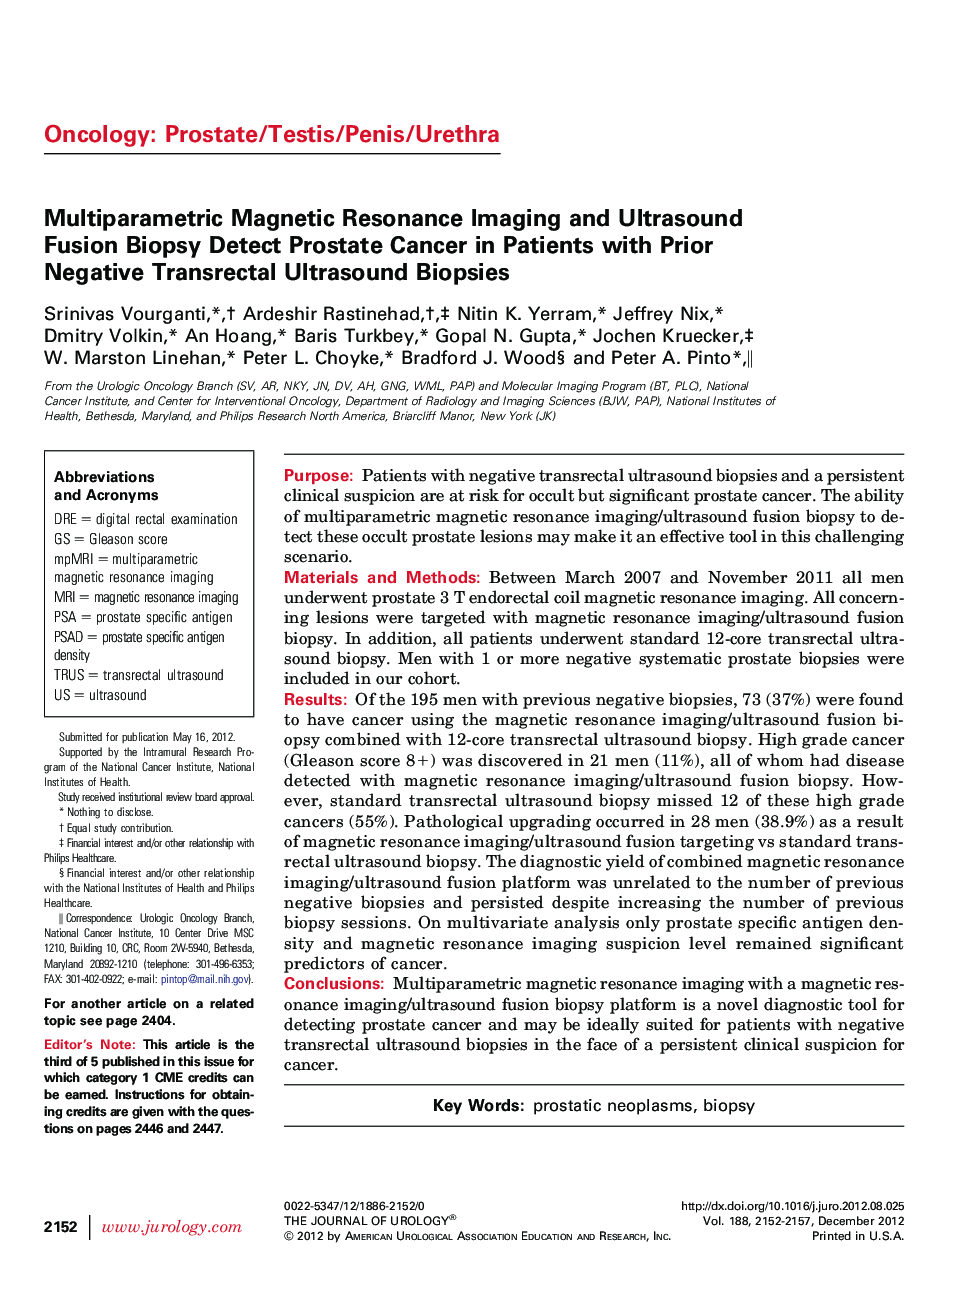 Adult UrologyOncology: Prostate/Testis/Penis/UrethraMultiparametric Magnetic Resonance Imaging and Ultrasound Fusion Biopsy Detect Prostate Cancer in Patients with Prior Negative Transrectal Ultrasound Biopsies